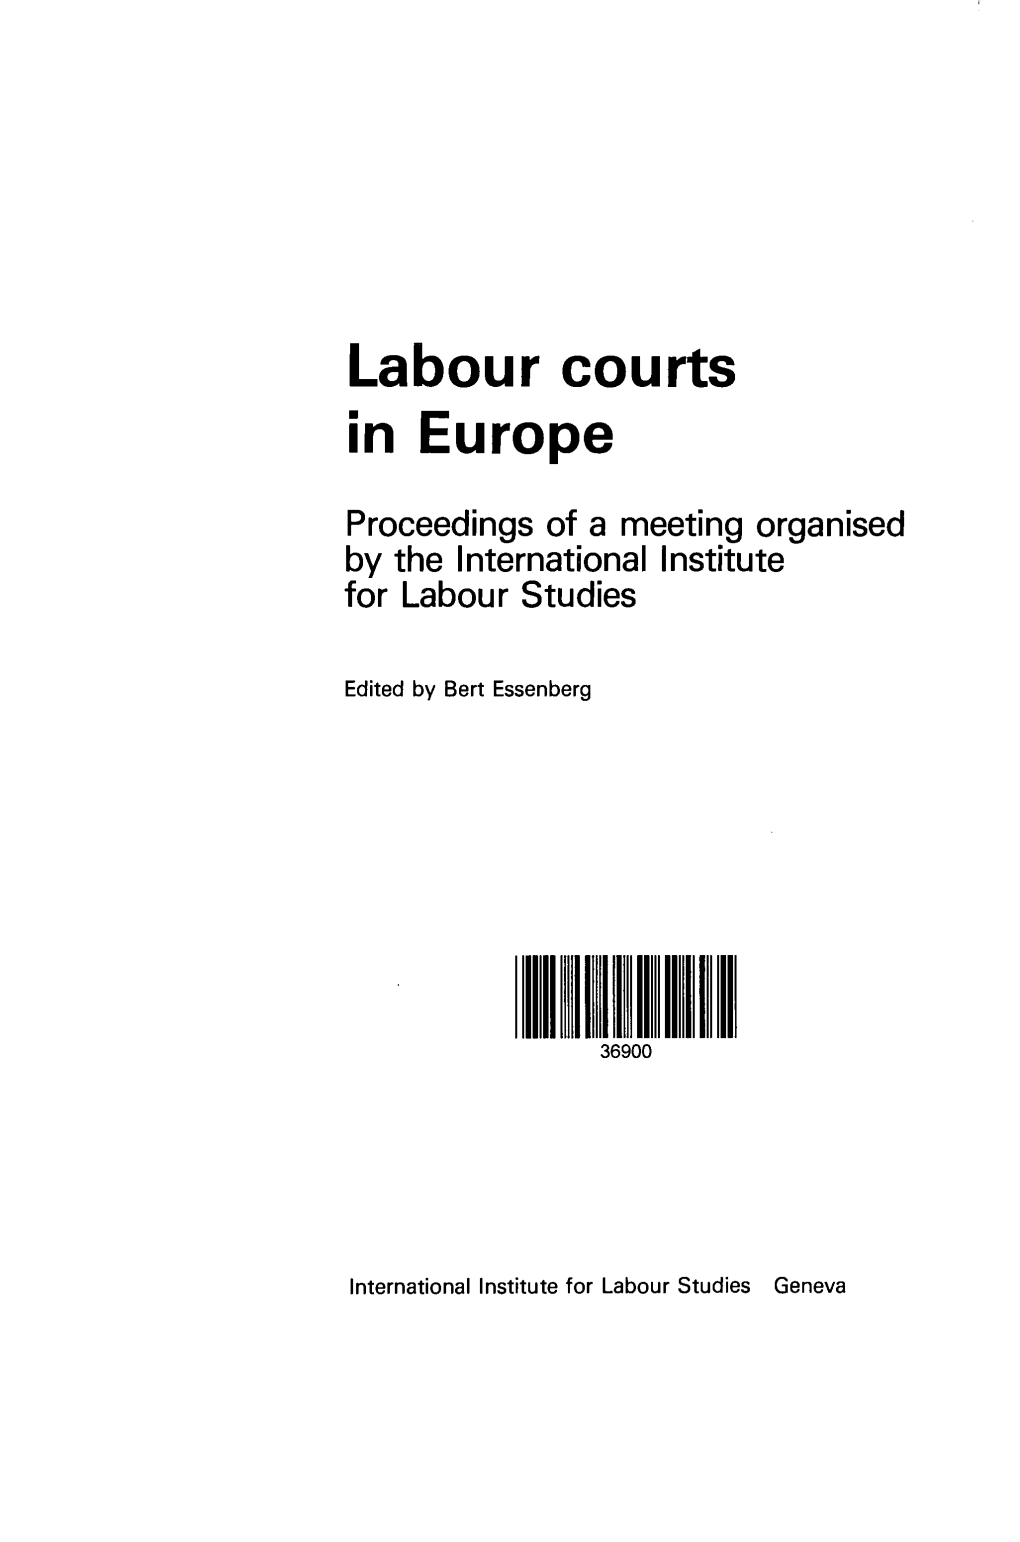 Labour Courts in Europe: Proceedings of a Meeting Organised by The